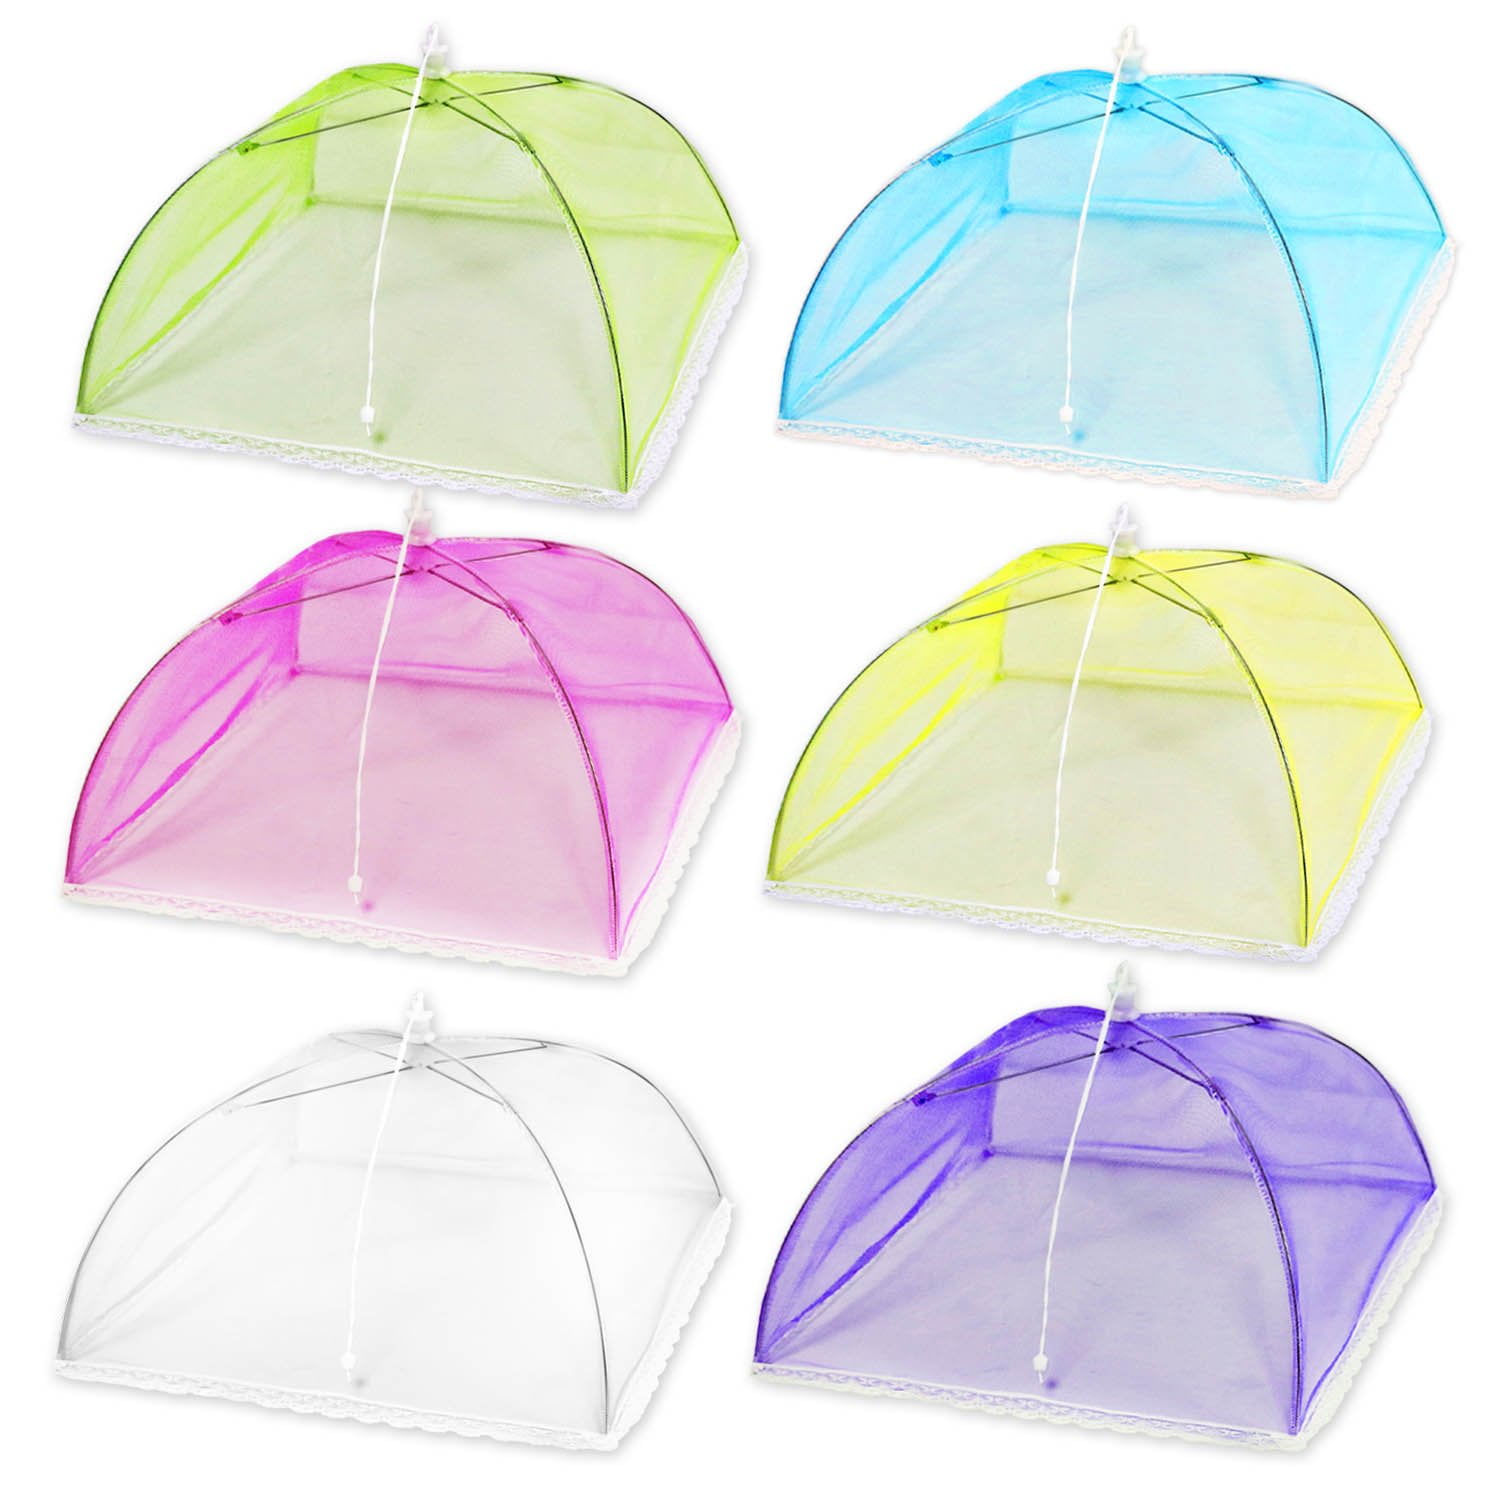 Mesh Folding Insect Cover Food Protective Umbrella P7C3 